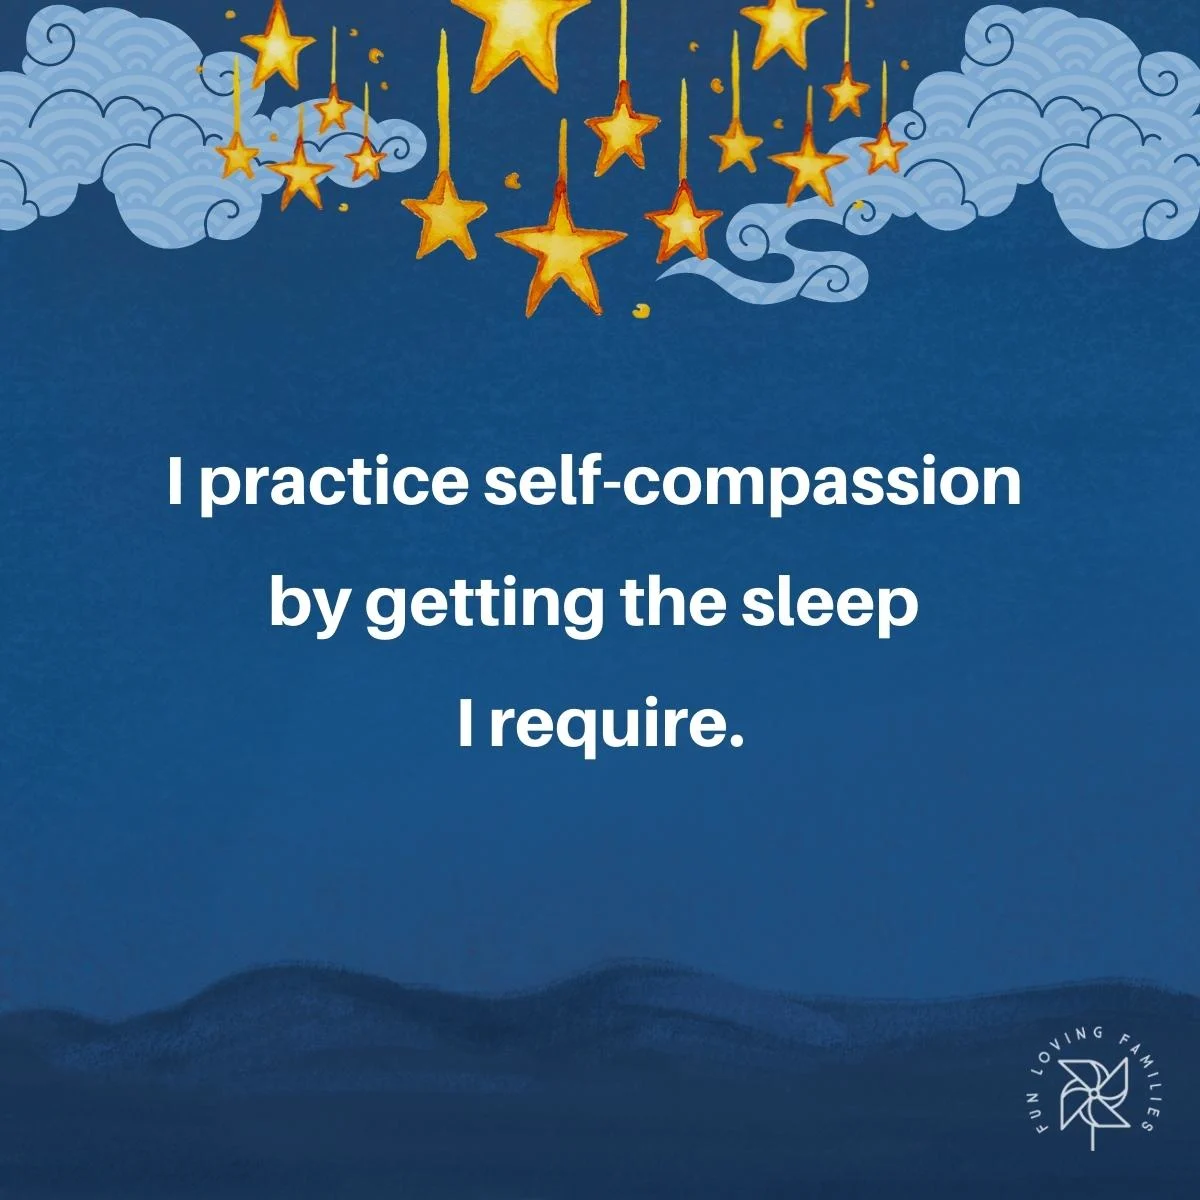 I practice self-compassion by getting the sleep I require affirmation